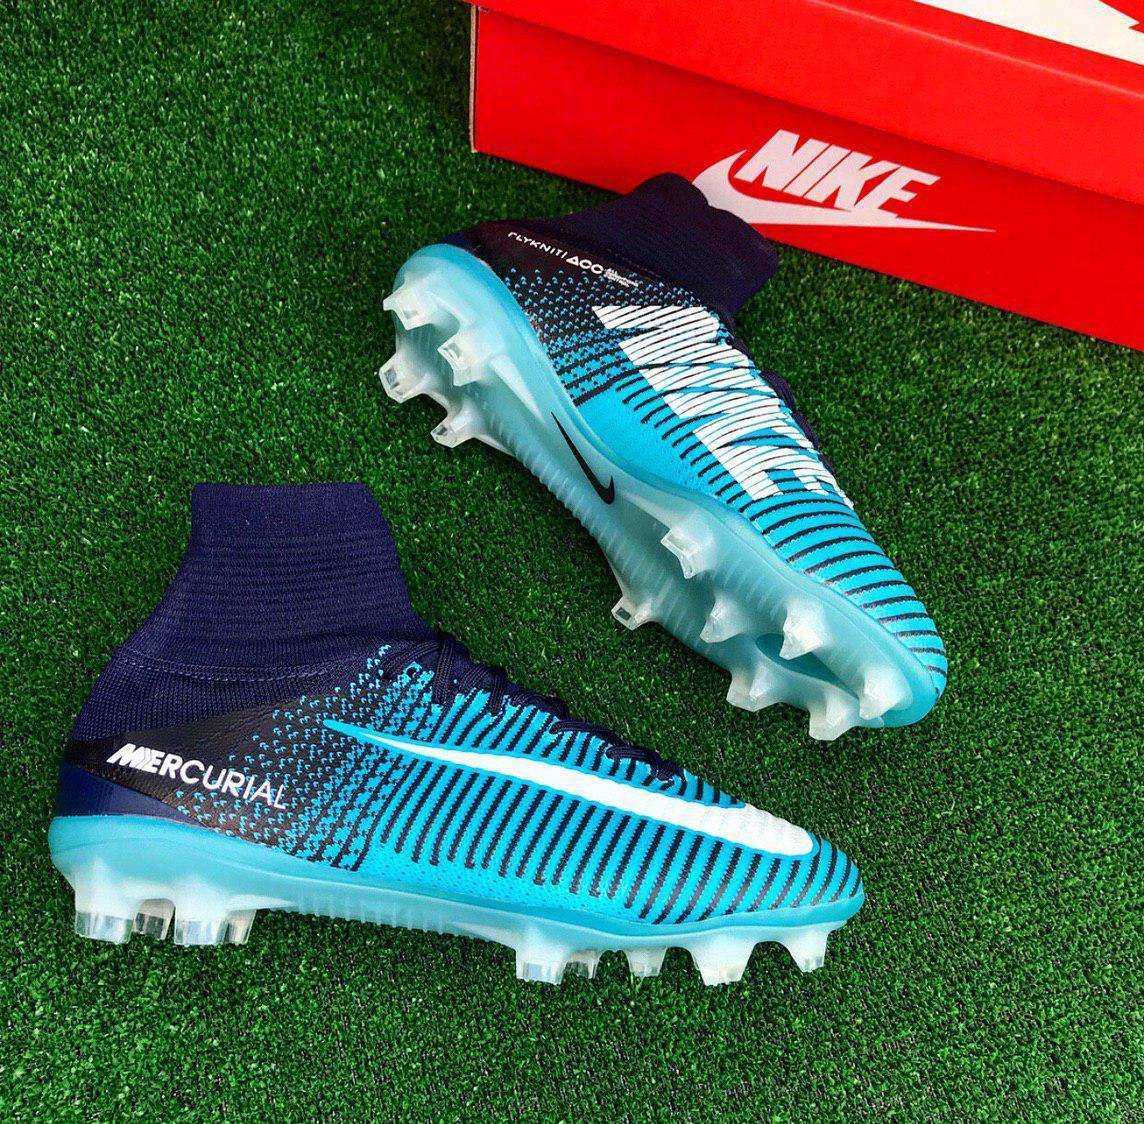 V Dynamic Chaussures Fit De Superfly Nike Mercurial Football